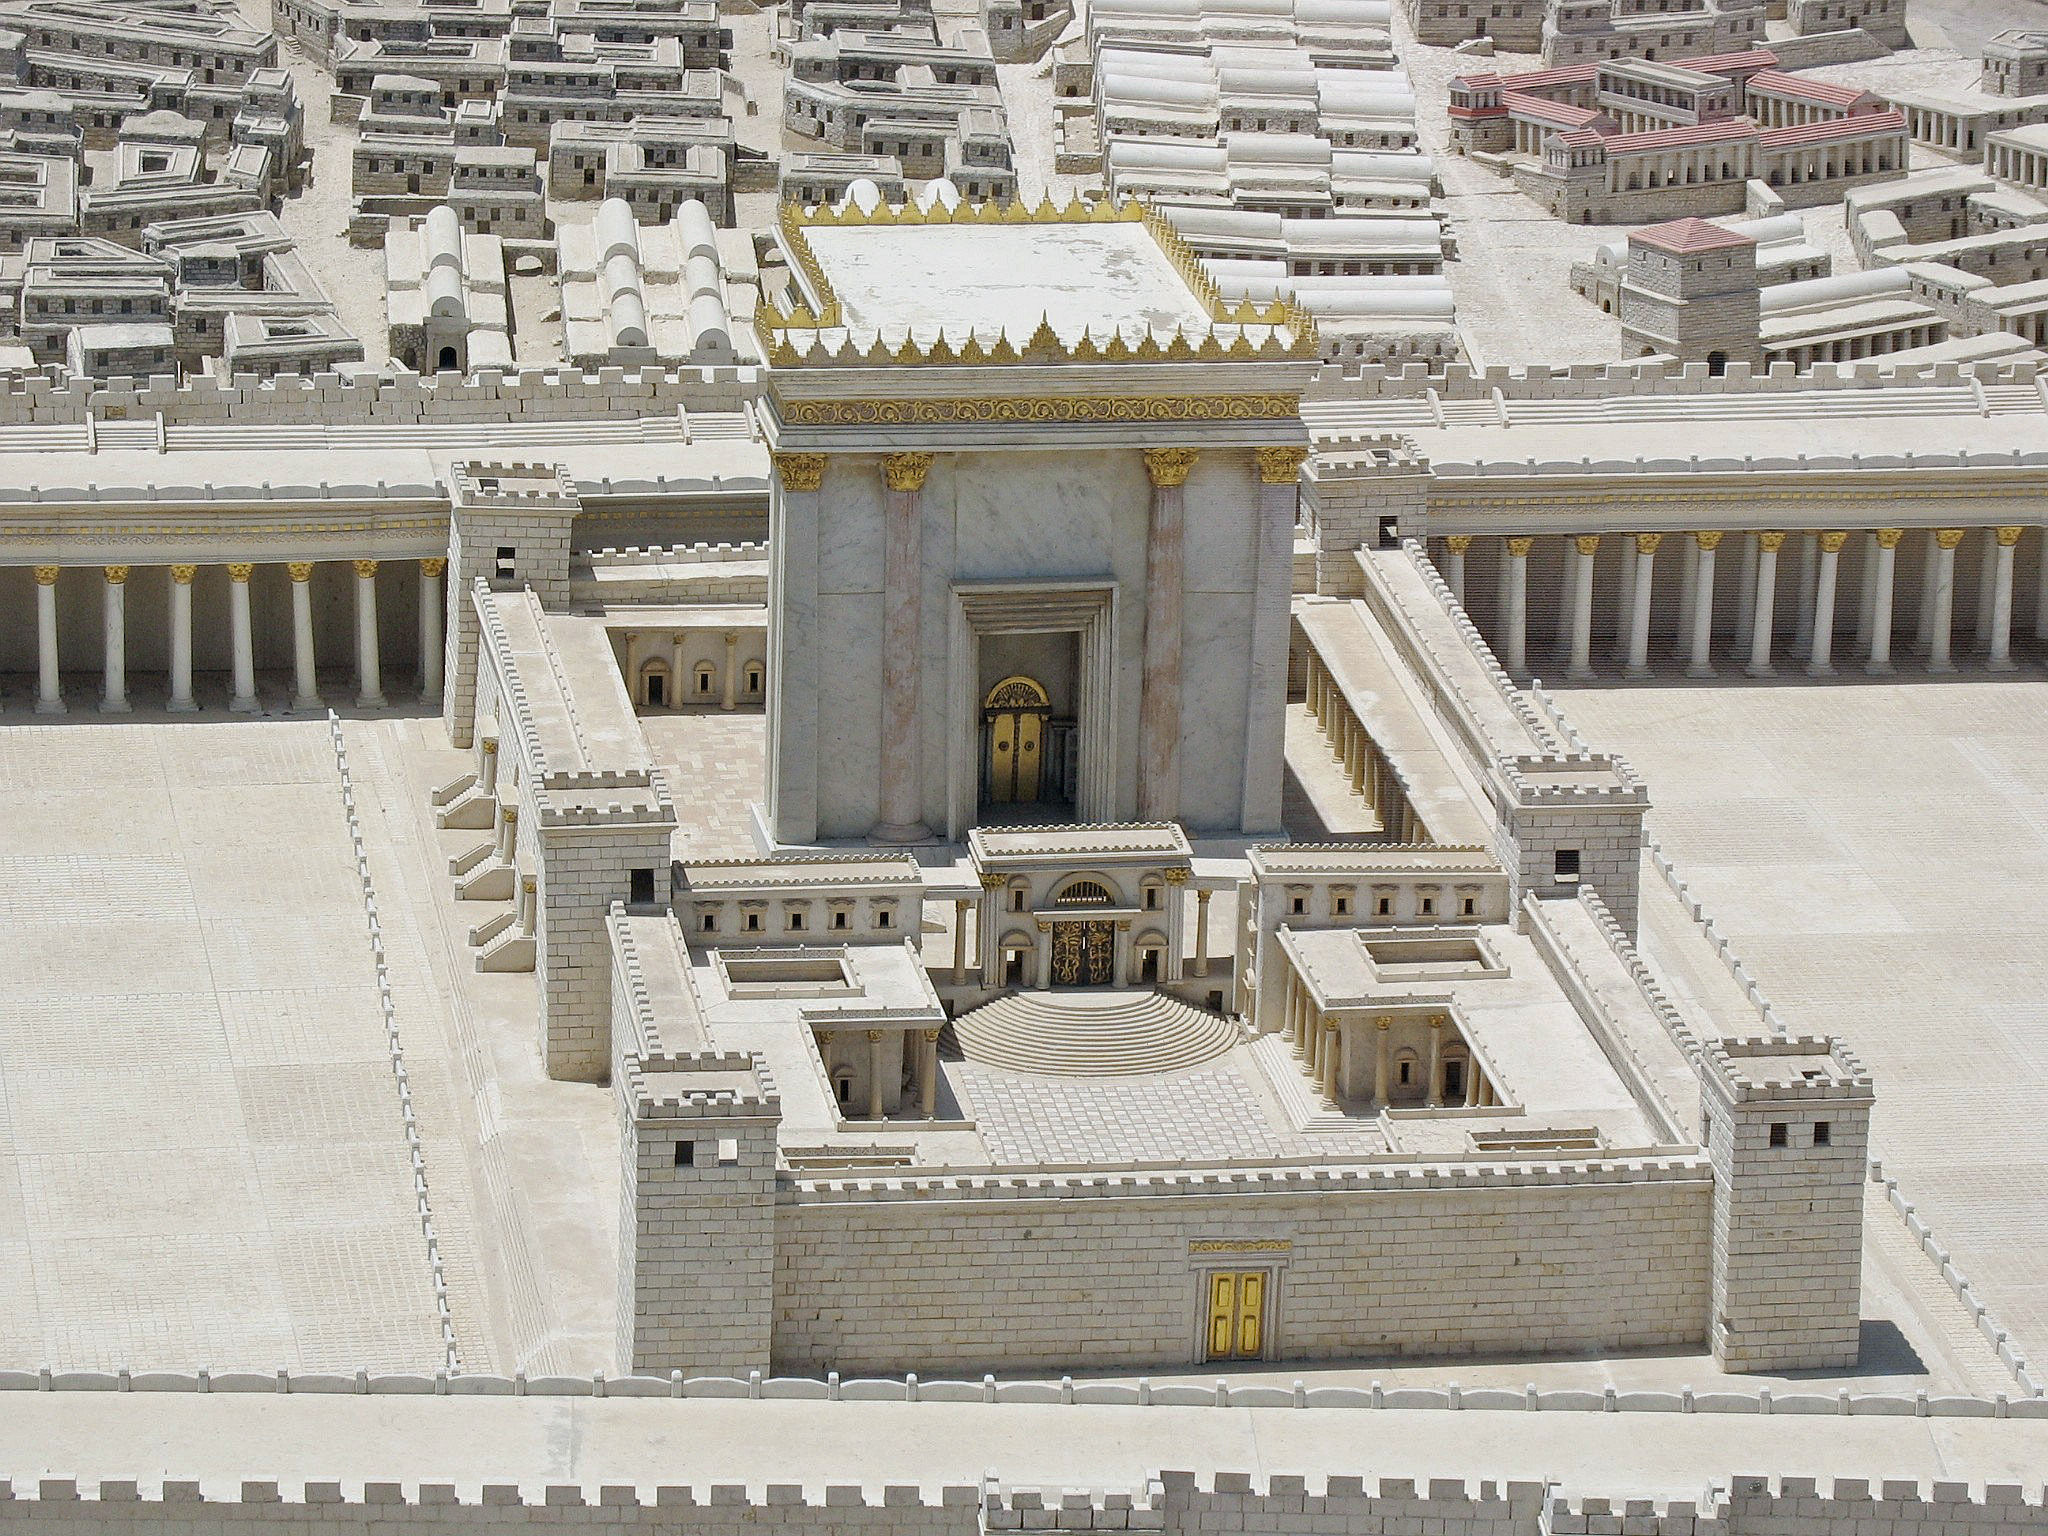 Herod's Temple, By Ariely - Own work, CC BY 3.0, https://commons.wikimedia.org/w/index.php?curid=4533576